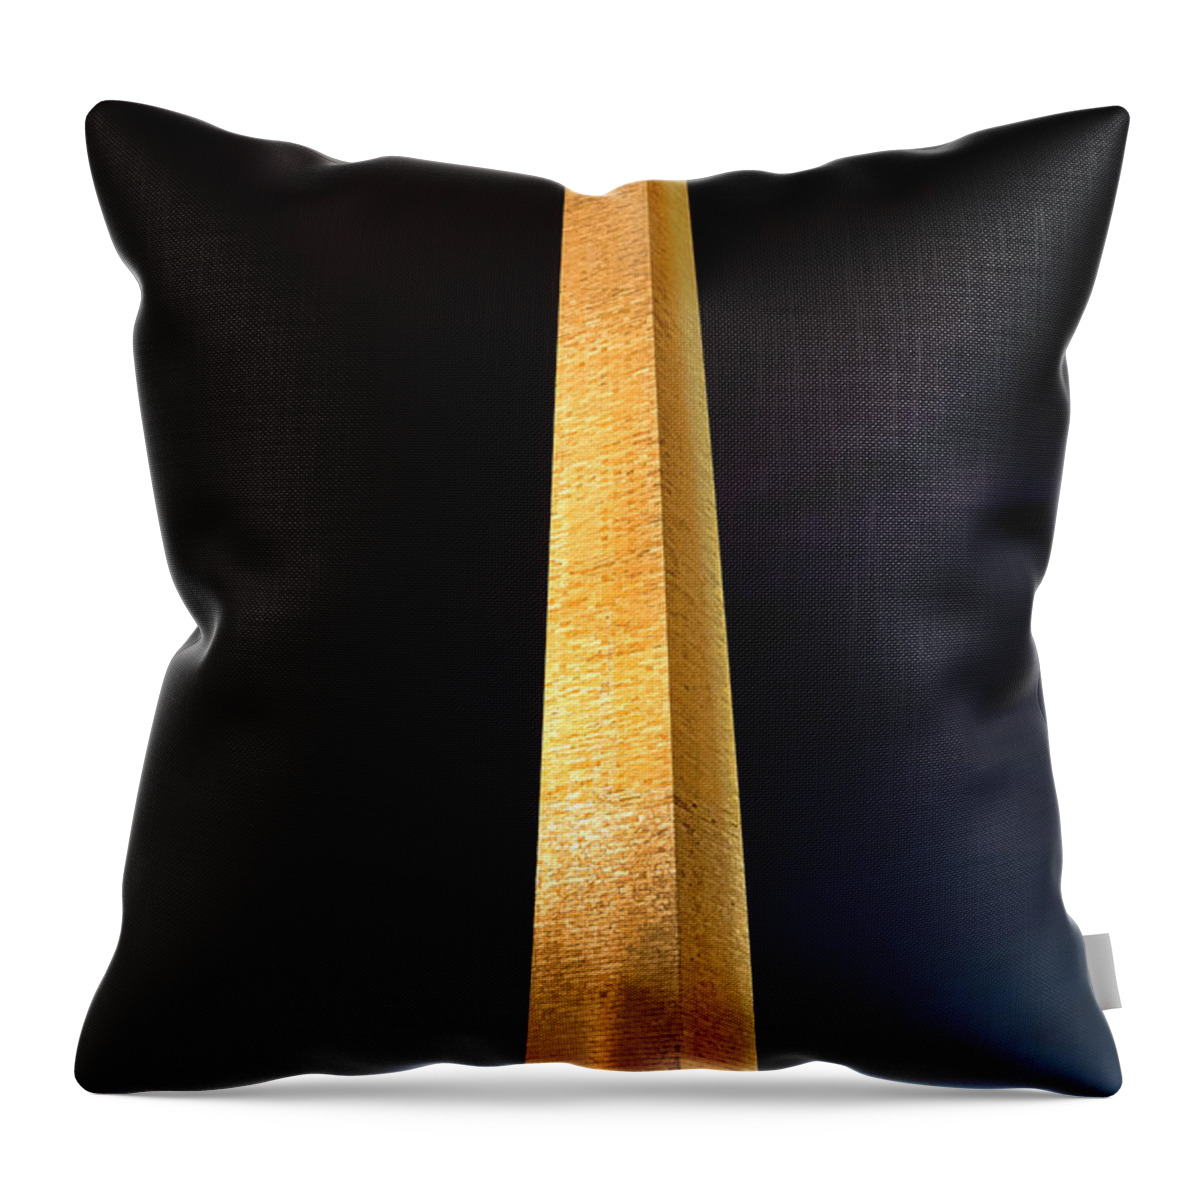 Washington Throw Pillow featuring the photograph Washington Monument at Night by Olivier Le Queinec